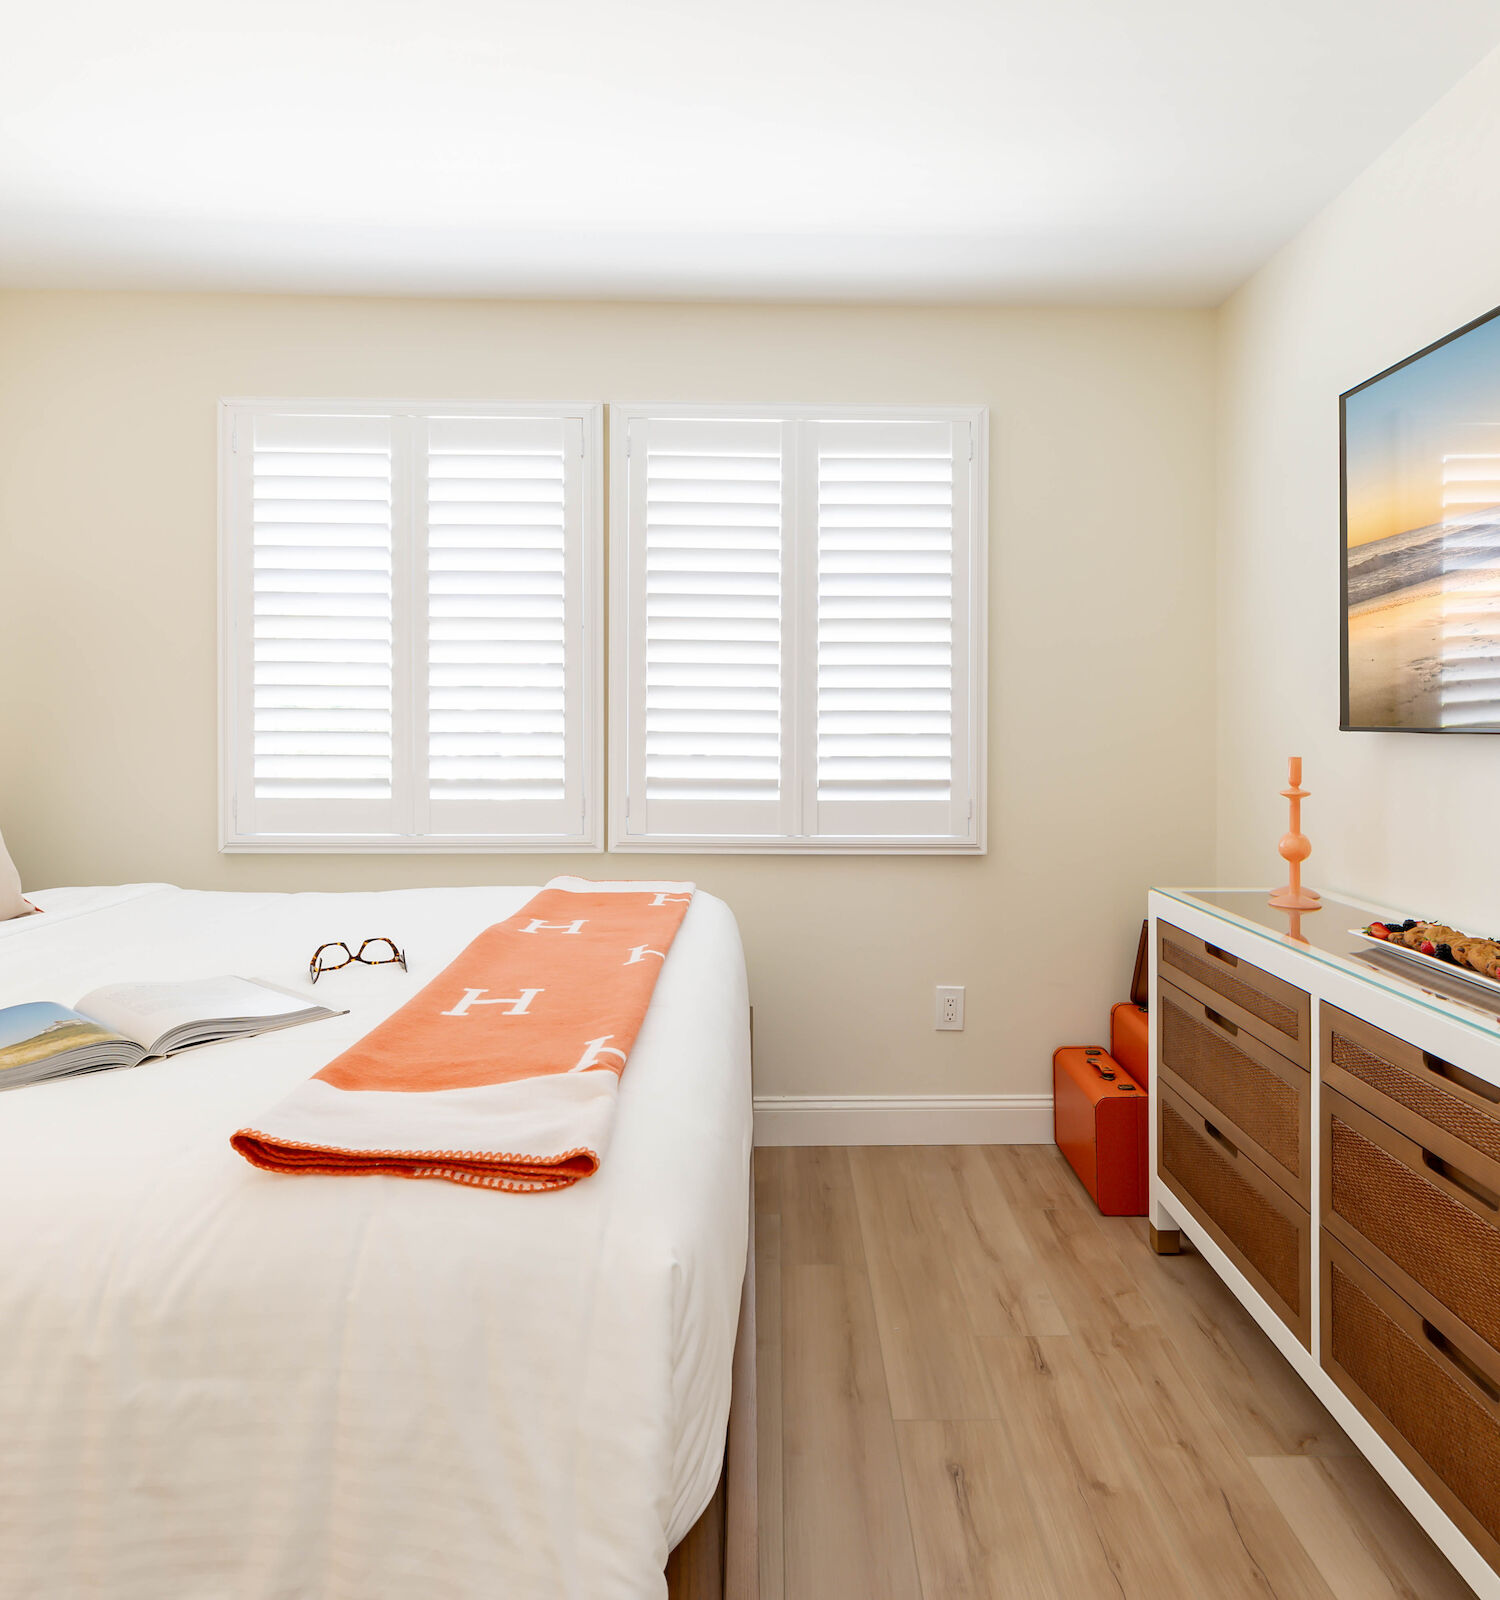 A minimalist bedroom features a bed with white linens and orange accents, a TV on the wall, and a dresser with decor items including a wine glass and bottle.